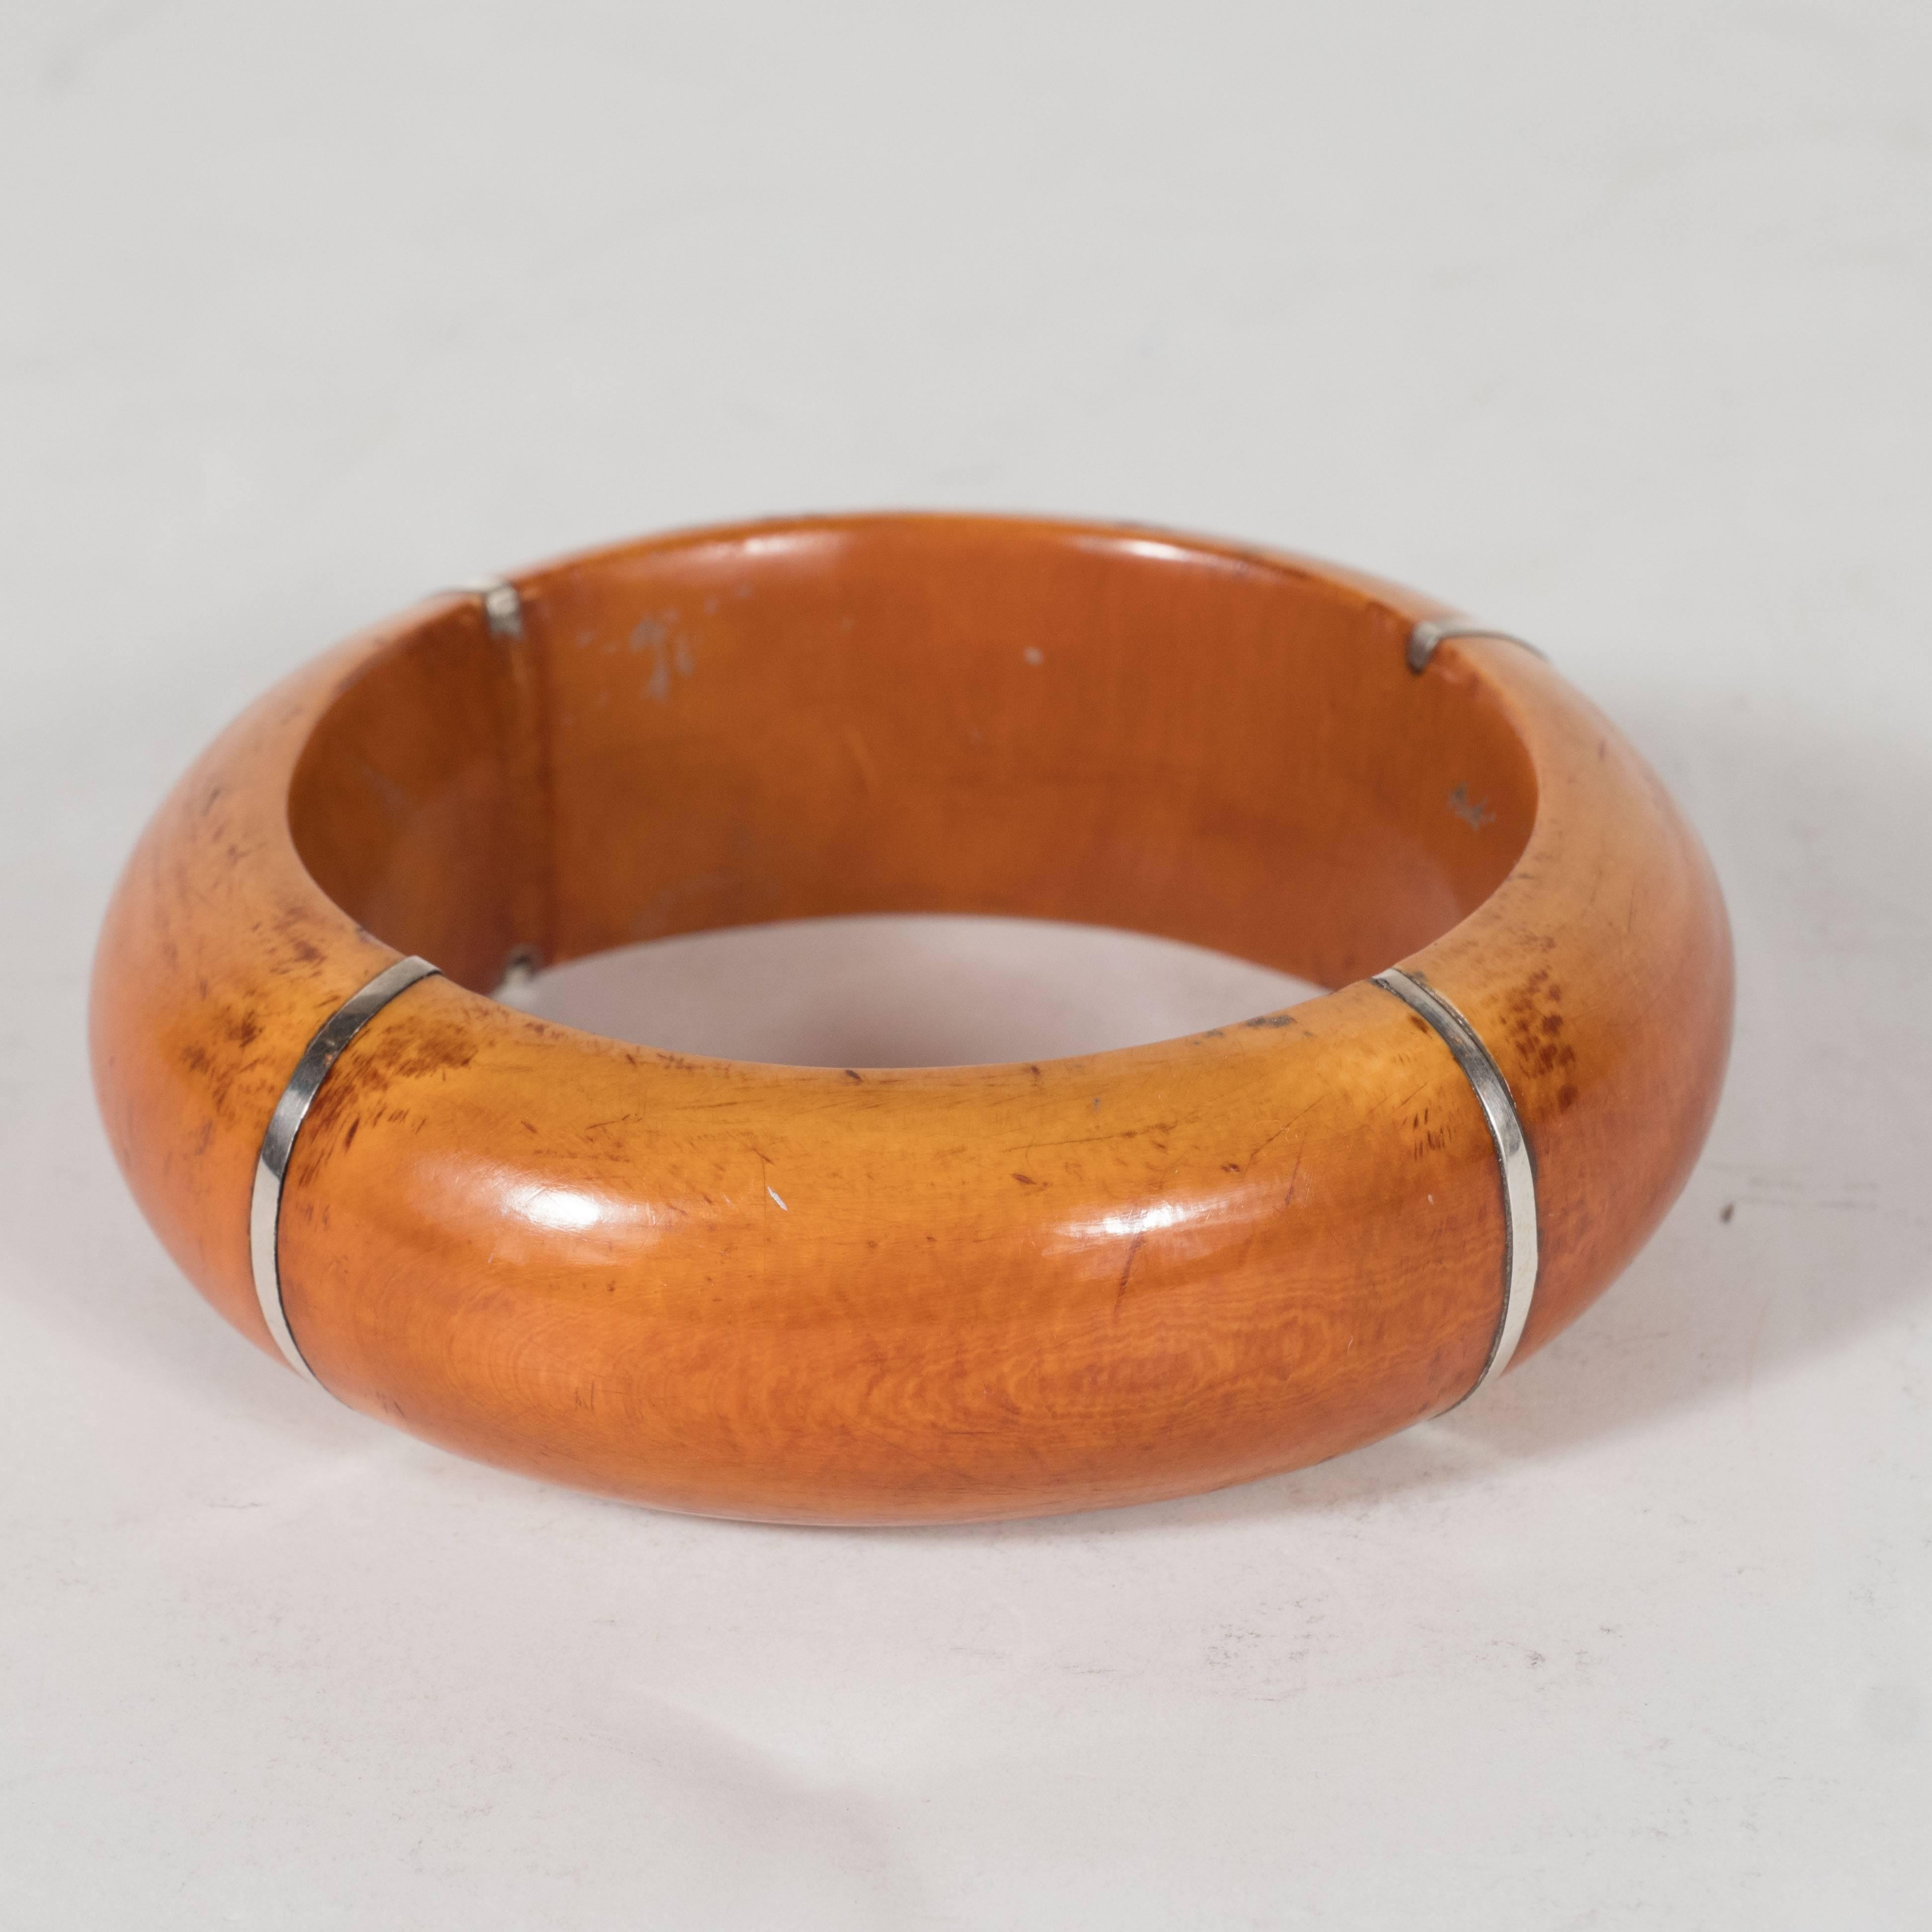 This refined bangle bracelet is composed of a tea stained bone in a rich Manuka honey hue with sterling silver inlaid accents. This piece is a testament to the beauty of simple design. Composed of just two elements, sterling silver and bone, this